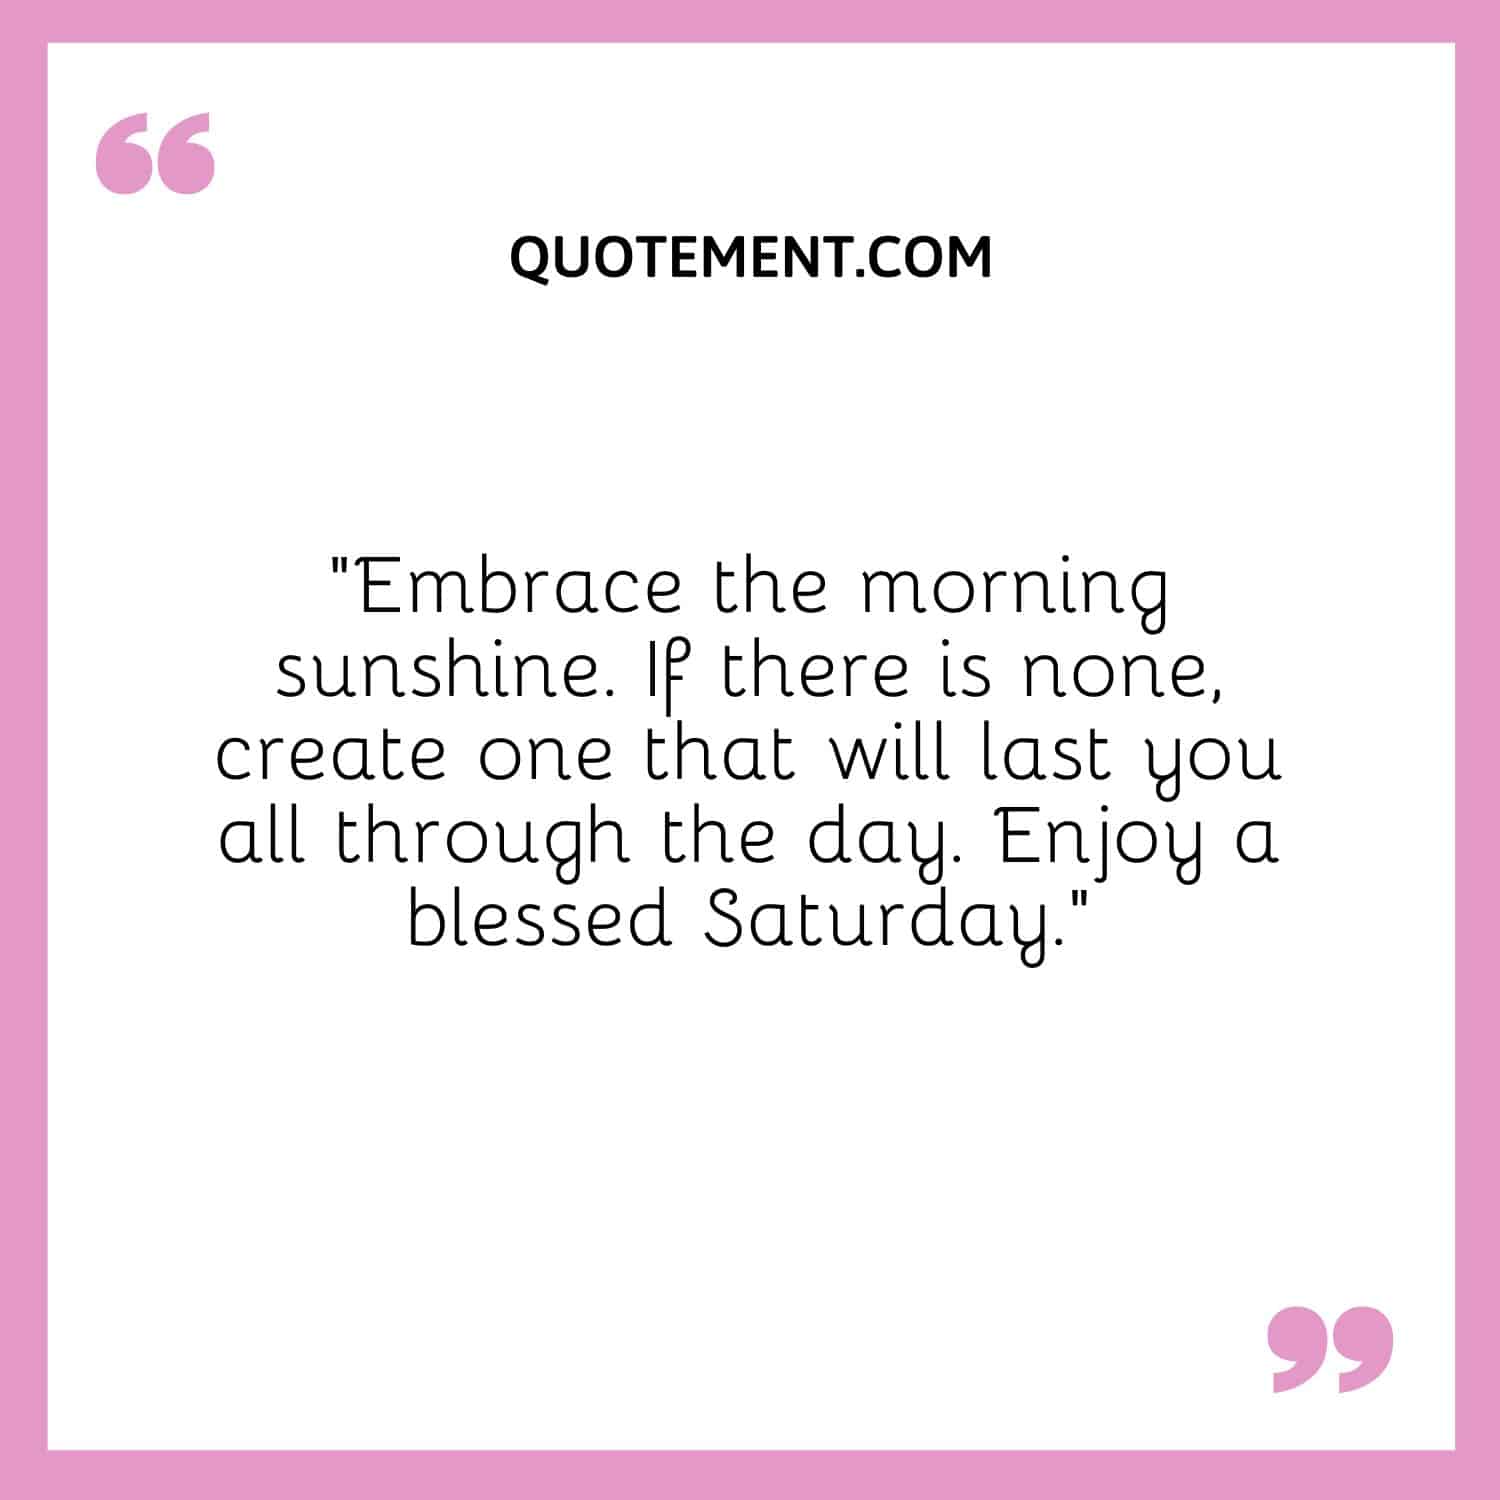 “Embrace the morning sunshine. If there is none, create one that will last you all through the day. Enjoy a blessed Saturday.”